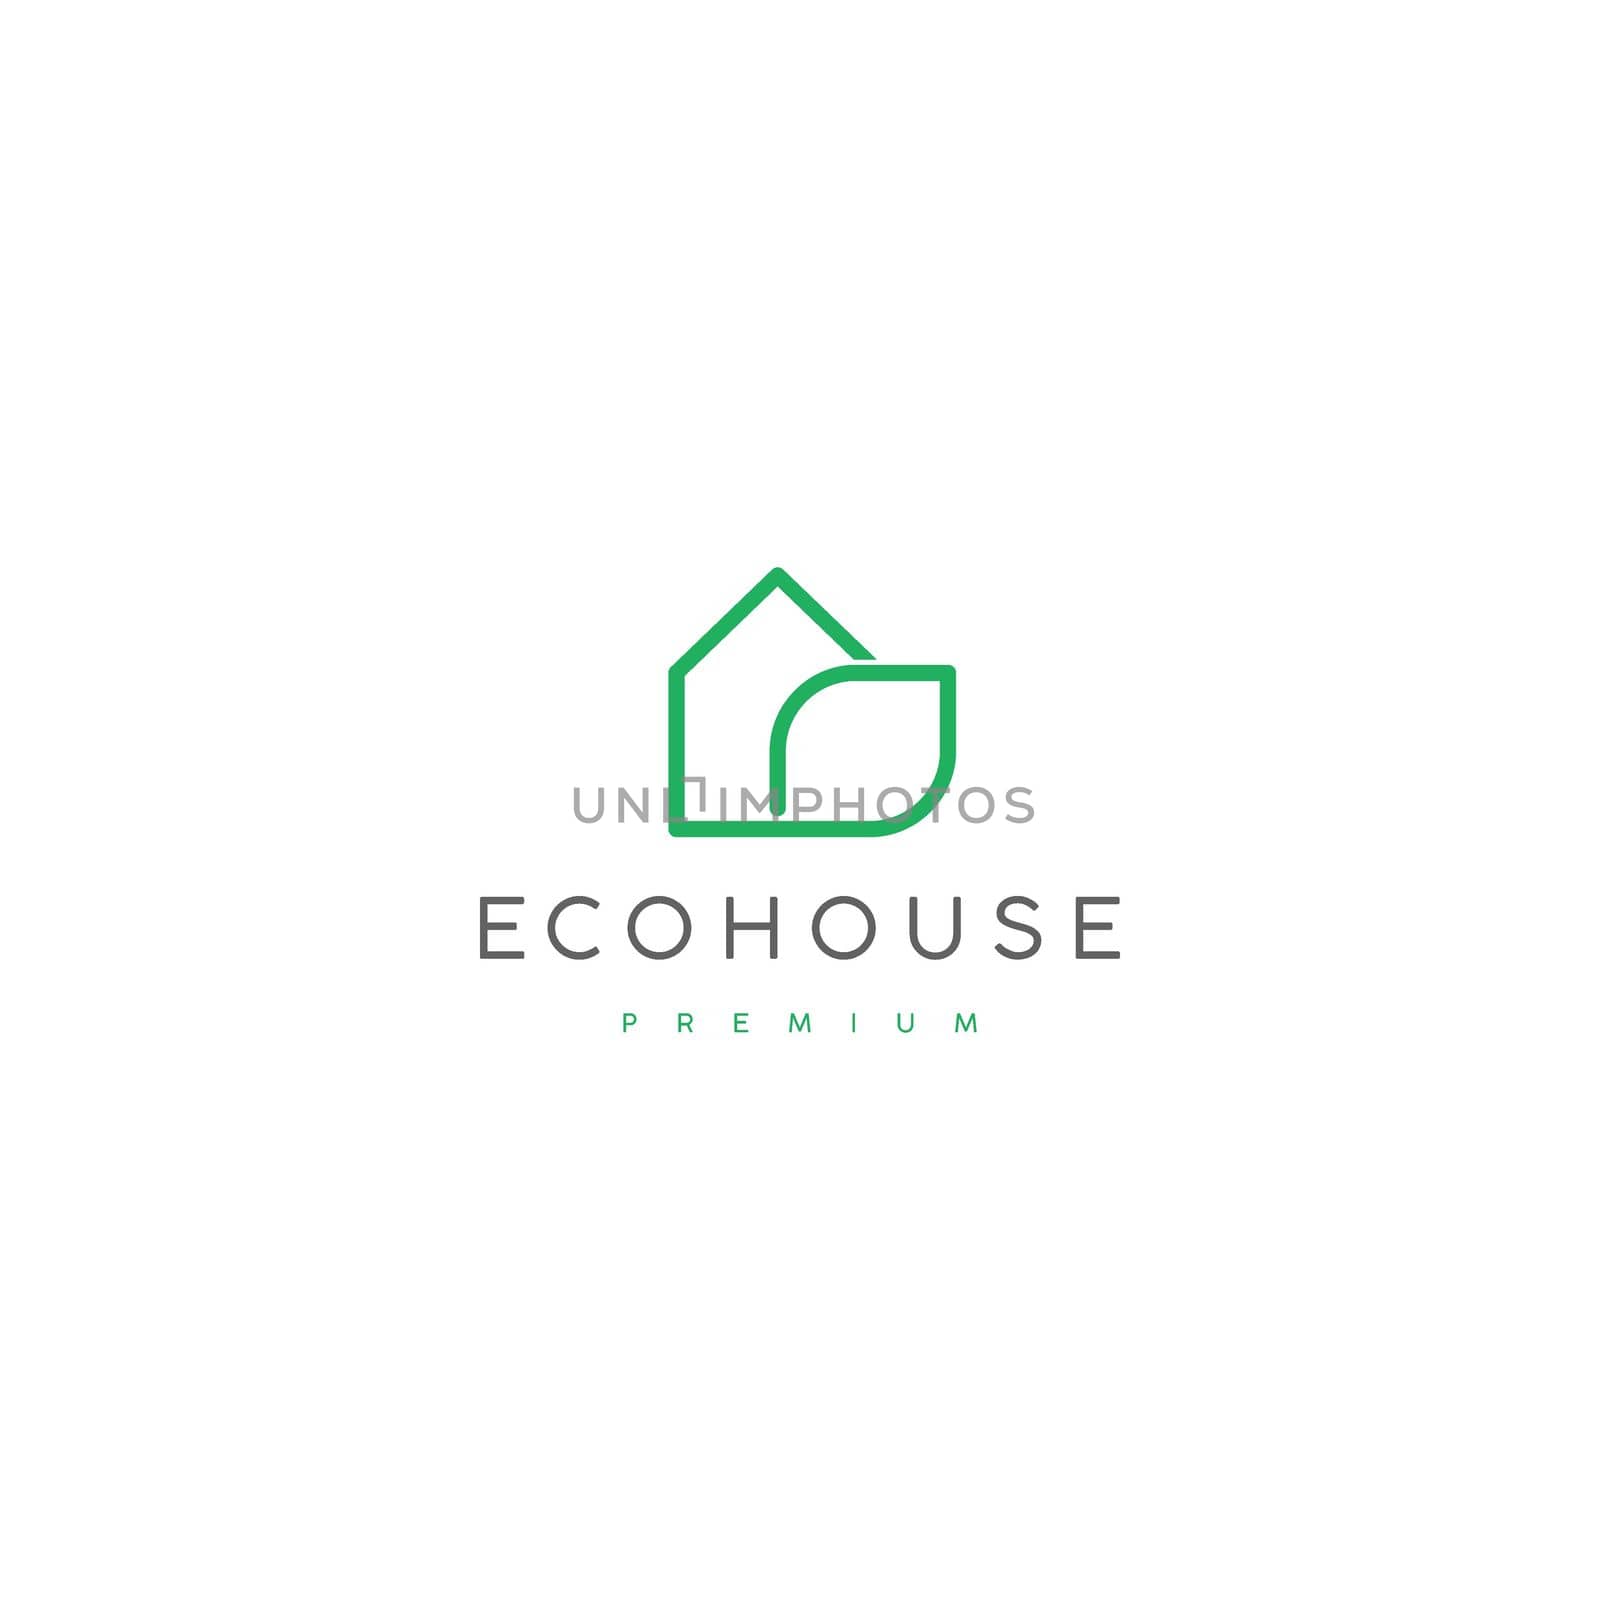 green house with leaf logo. mono line art concept of nature home vector elements stock illustration.